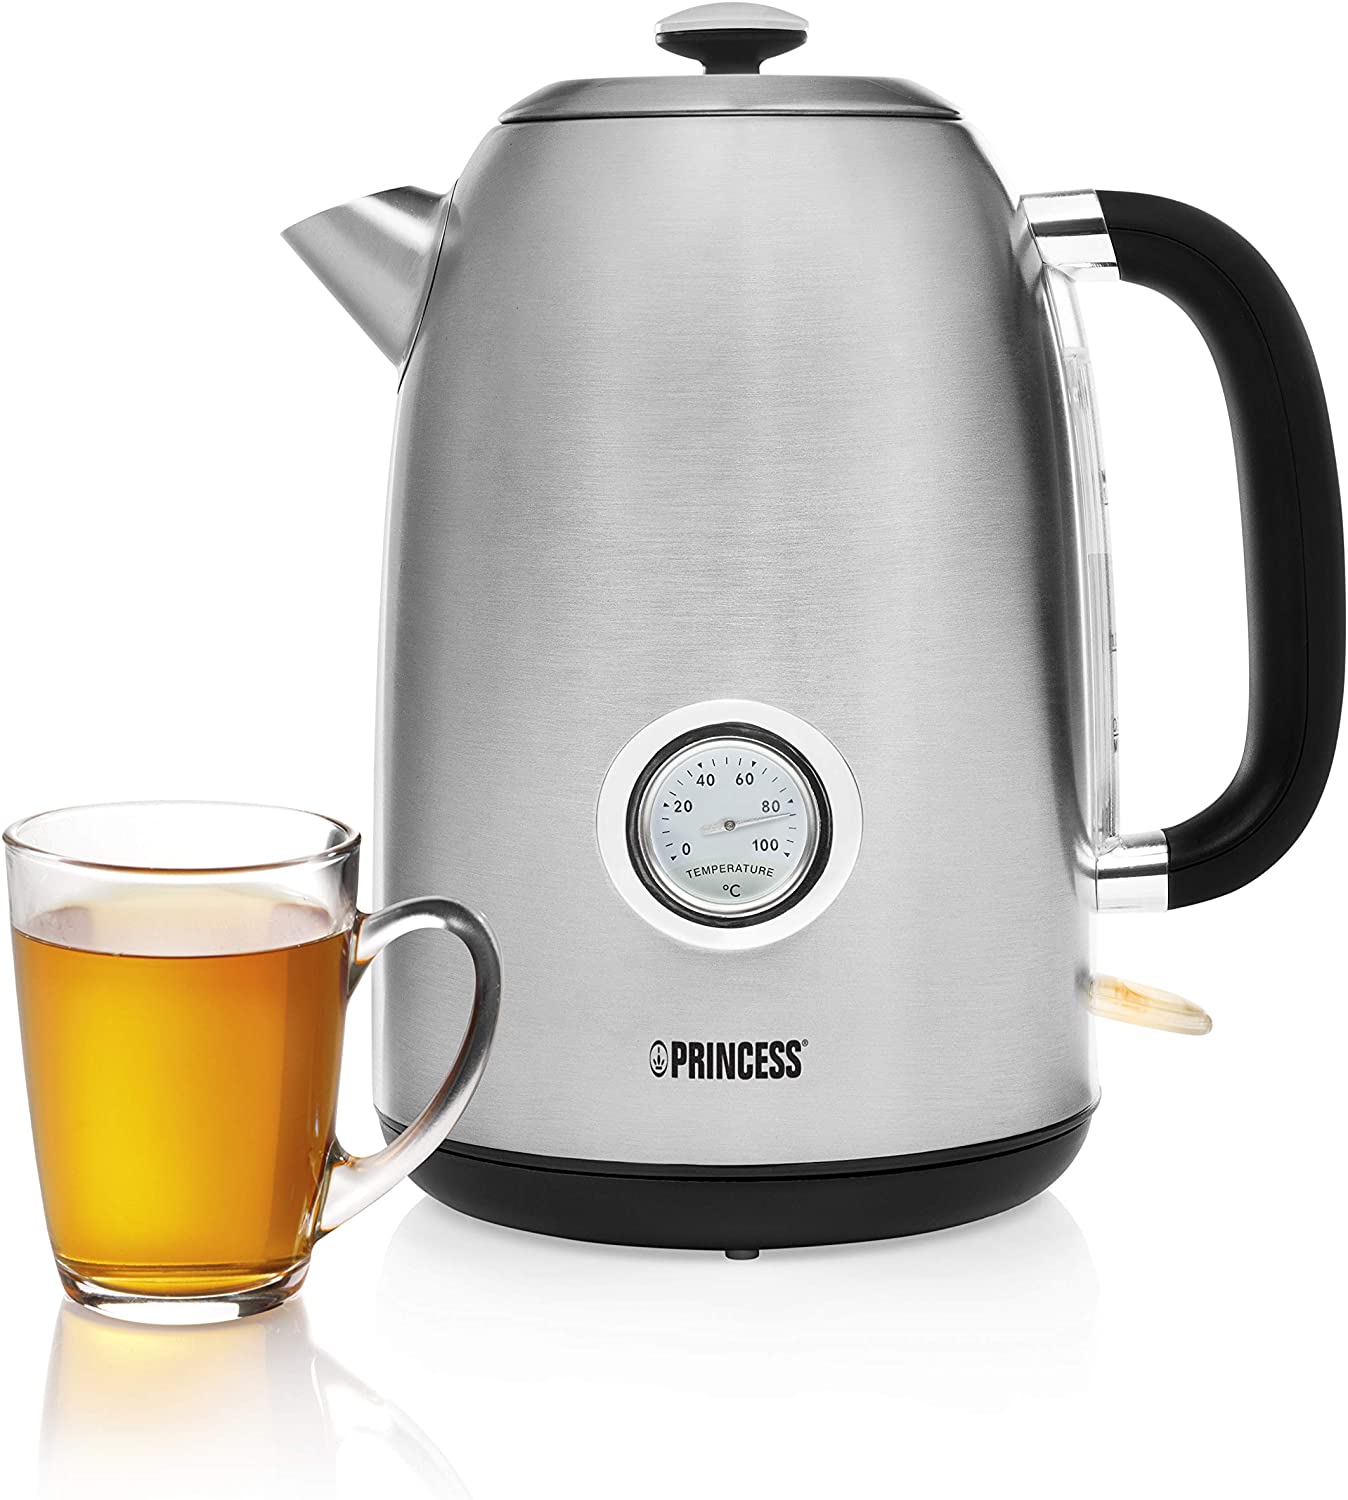 Princess 01.236028.01.001 1.7 Litre Stainless Steel Kettle with Thermometer and Water Level Indicator / 236028, 3000, Silver